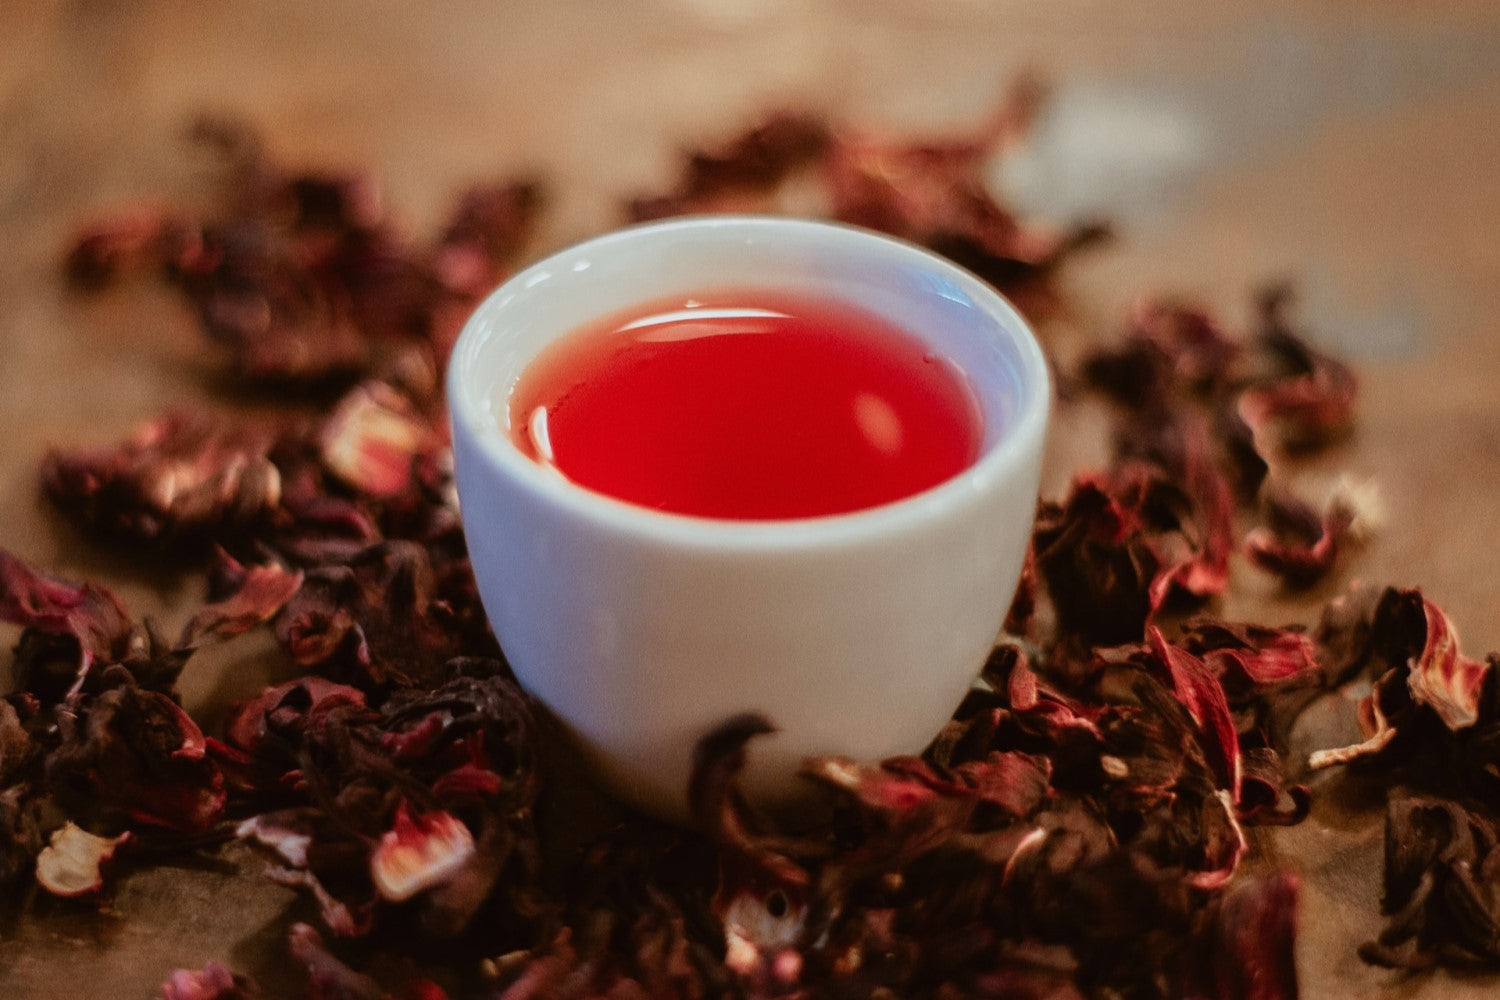 white teacup with red liquid and loose-leaf tea around it